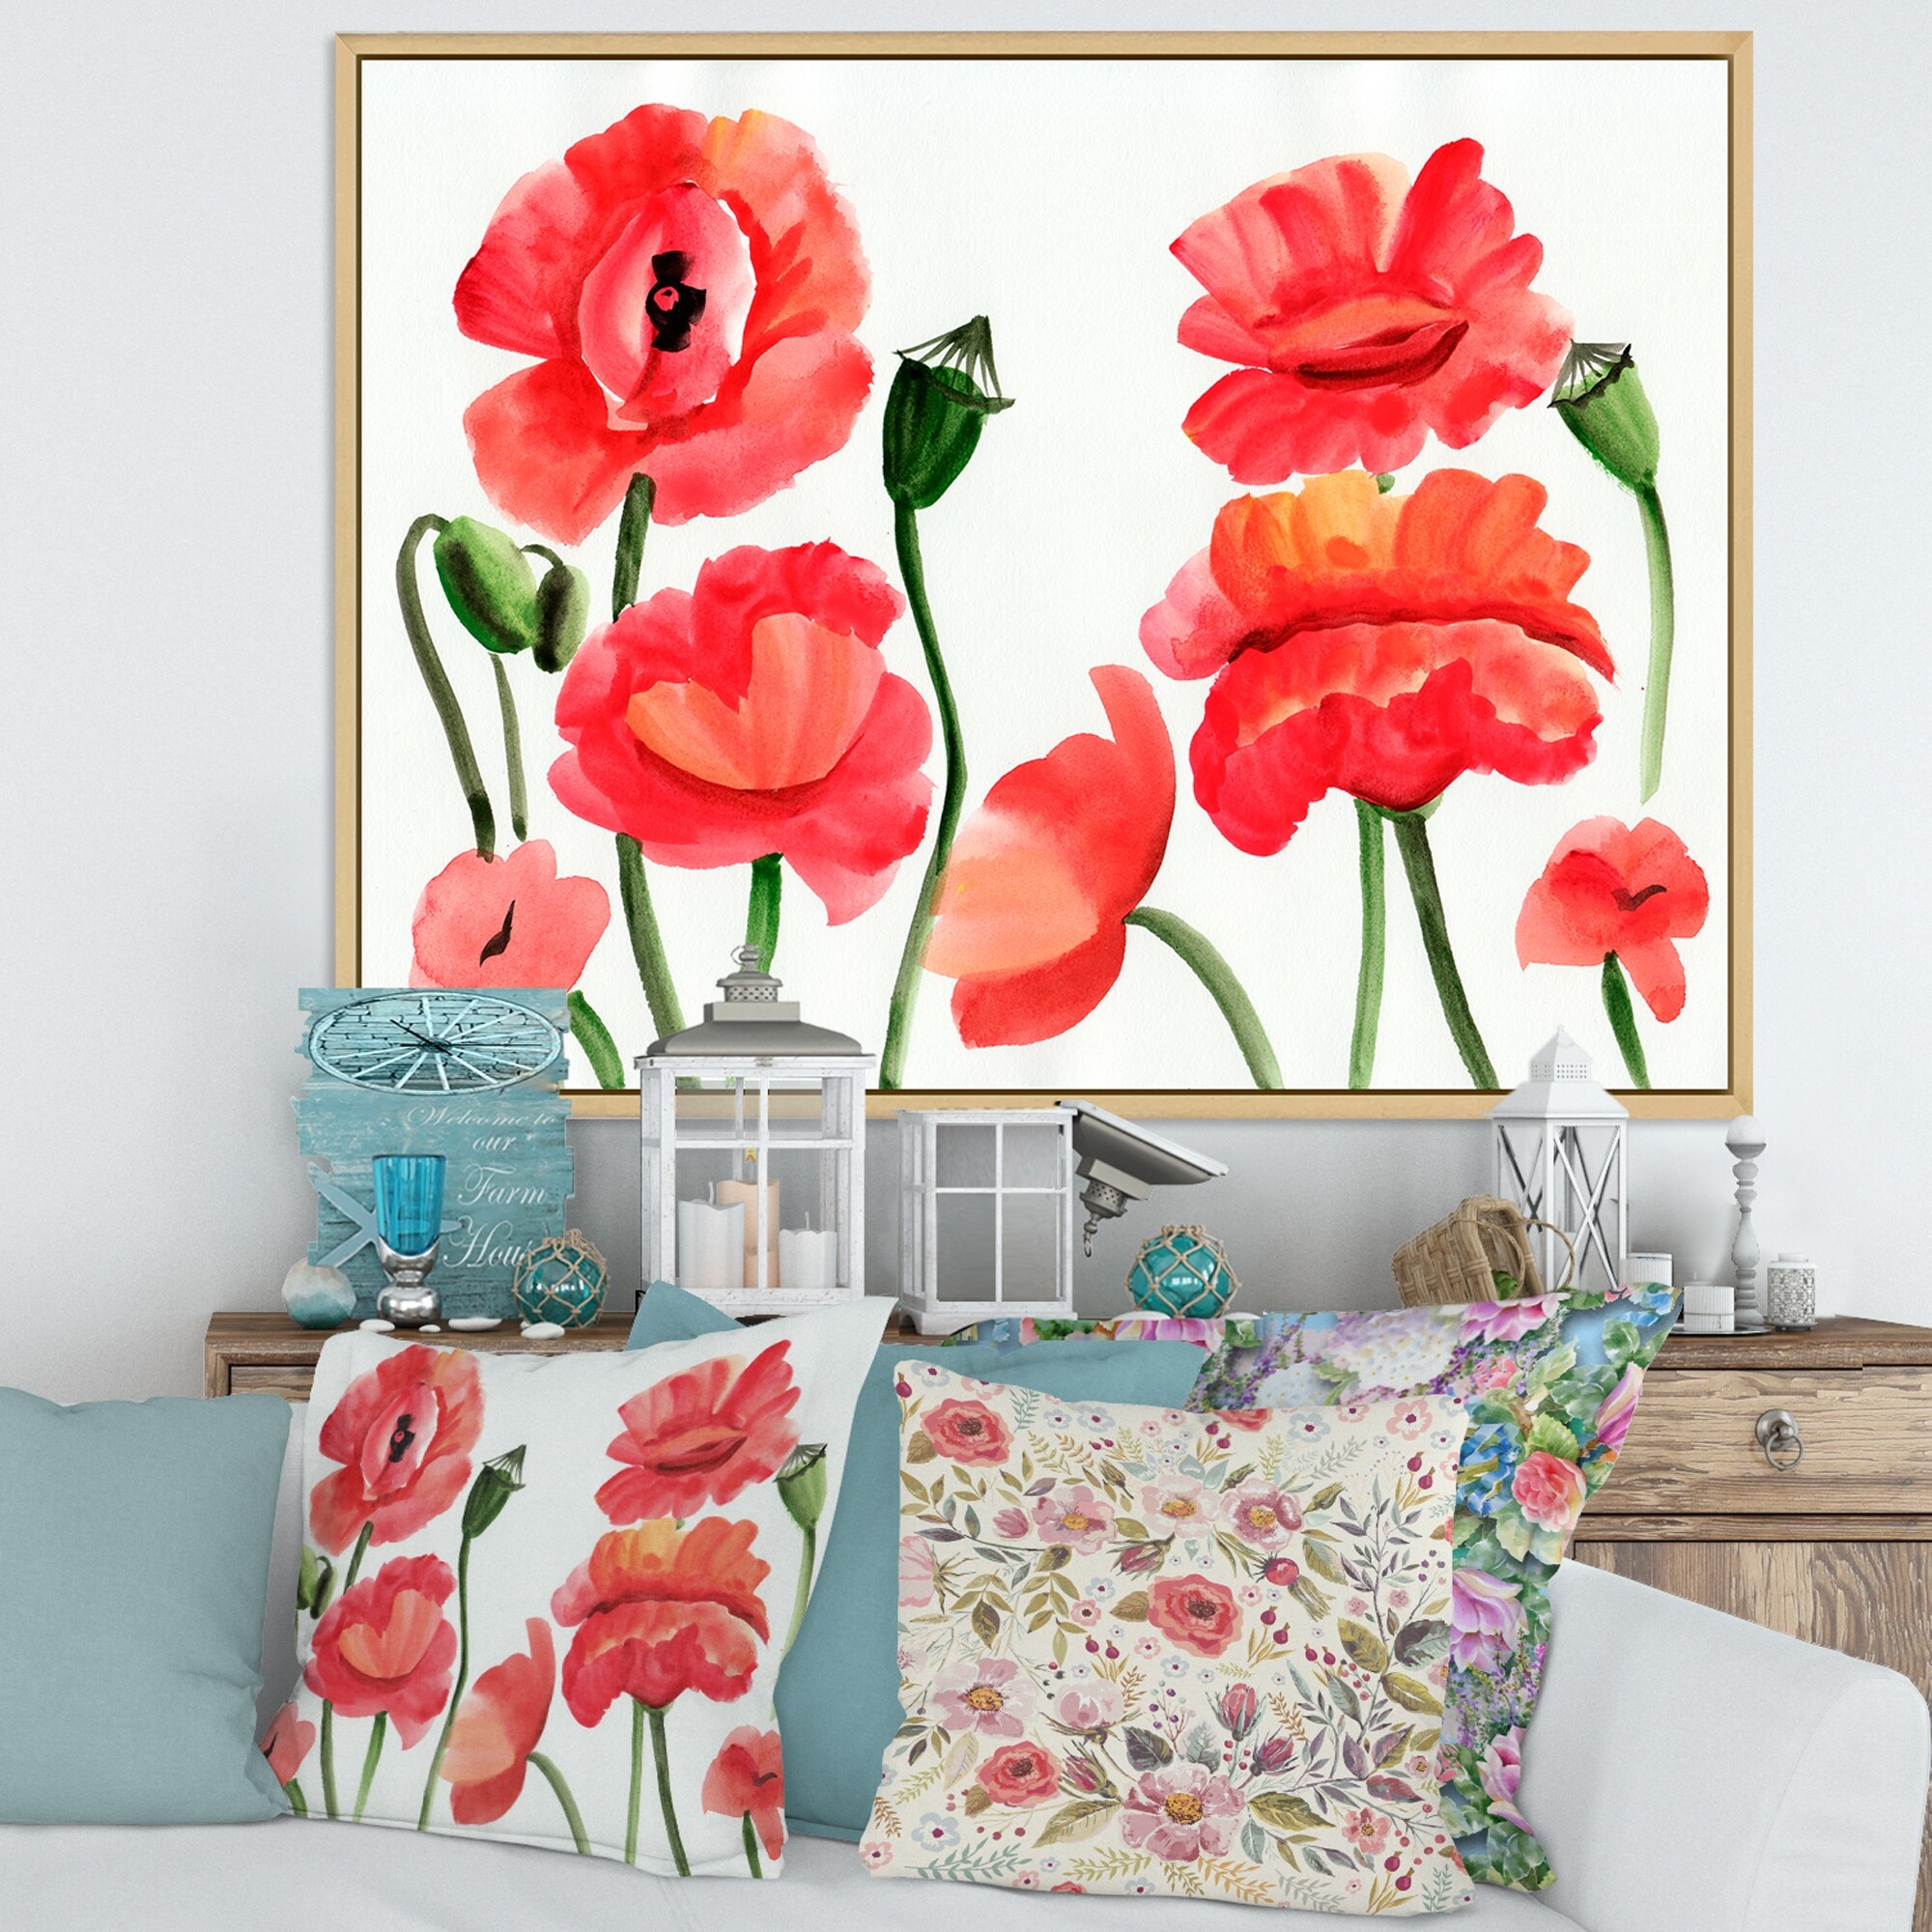 https://ak1.ostkcdn.com/images/products/is/images/direct/ac6482ba60bc6a8c87bfd216bdd5c6d8394c38b5/Designart-%27Vintage-Red-Poppies-I%27-Traditional-Framed-Canvas-Wall-Art-Print.jpg